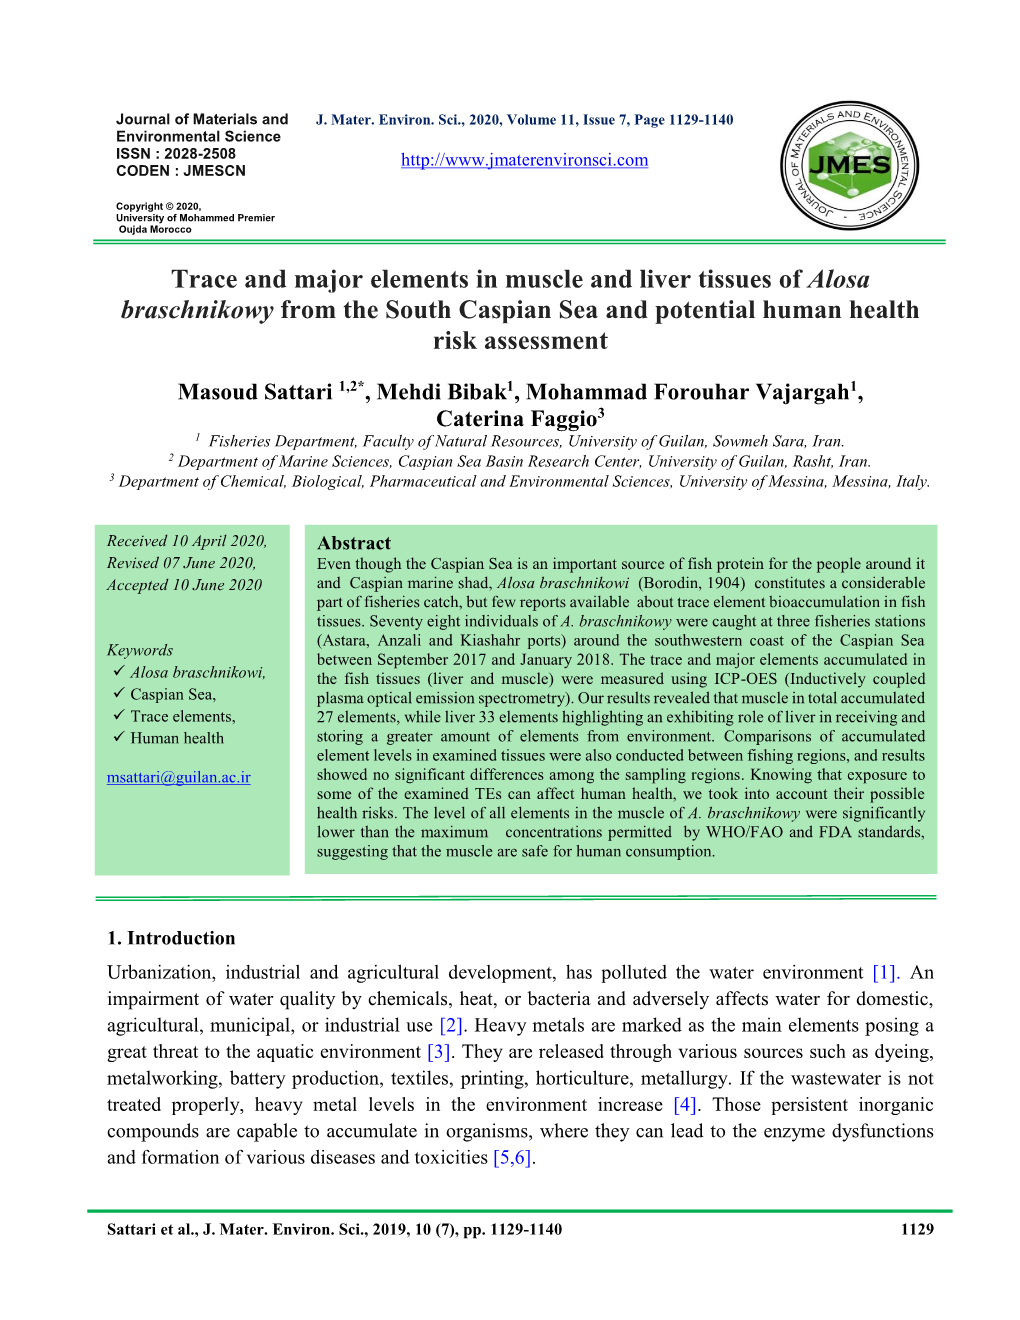 Trace and Major Elements in Muscle and Liver Tissues of Alosa Braschnikowy from the South Caspian Sea and Potential Human Health Risk Assessment